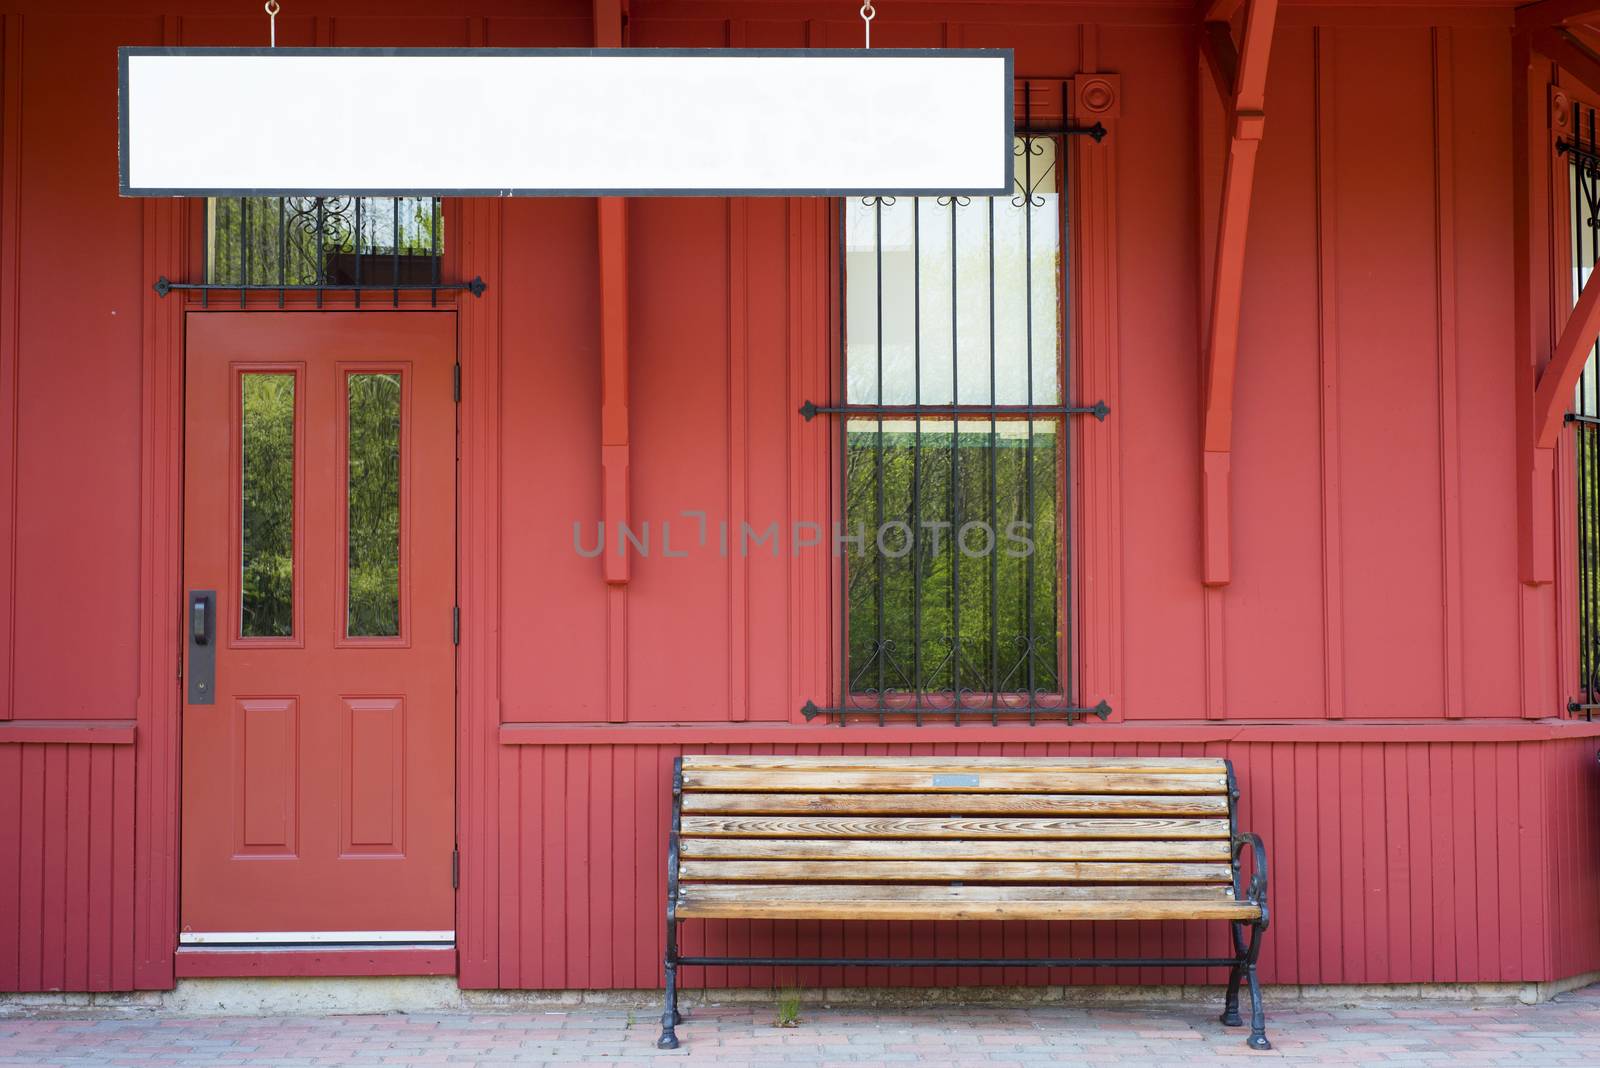 Empty bench by blank sign against red wooden walls